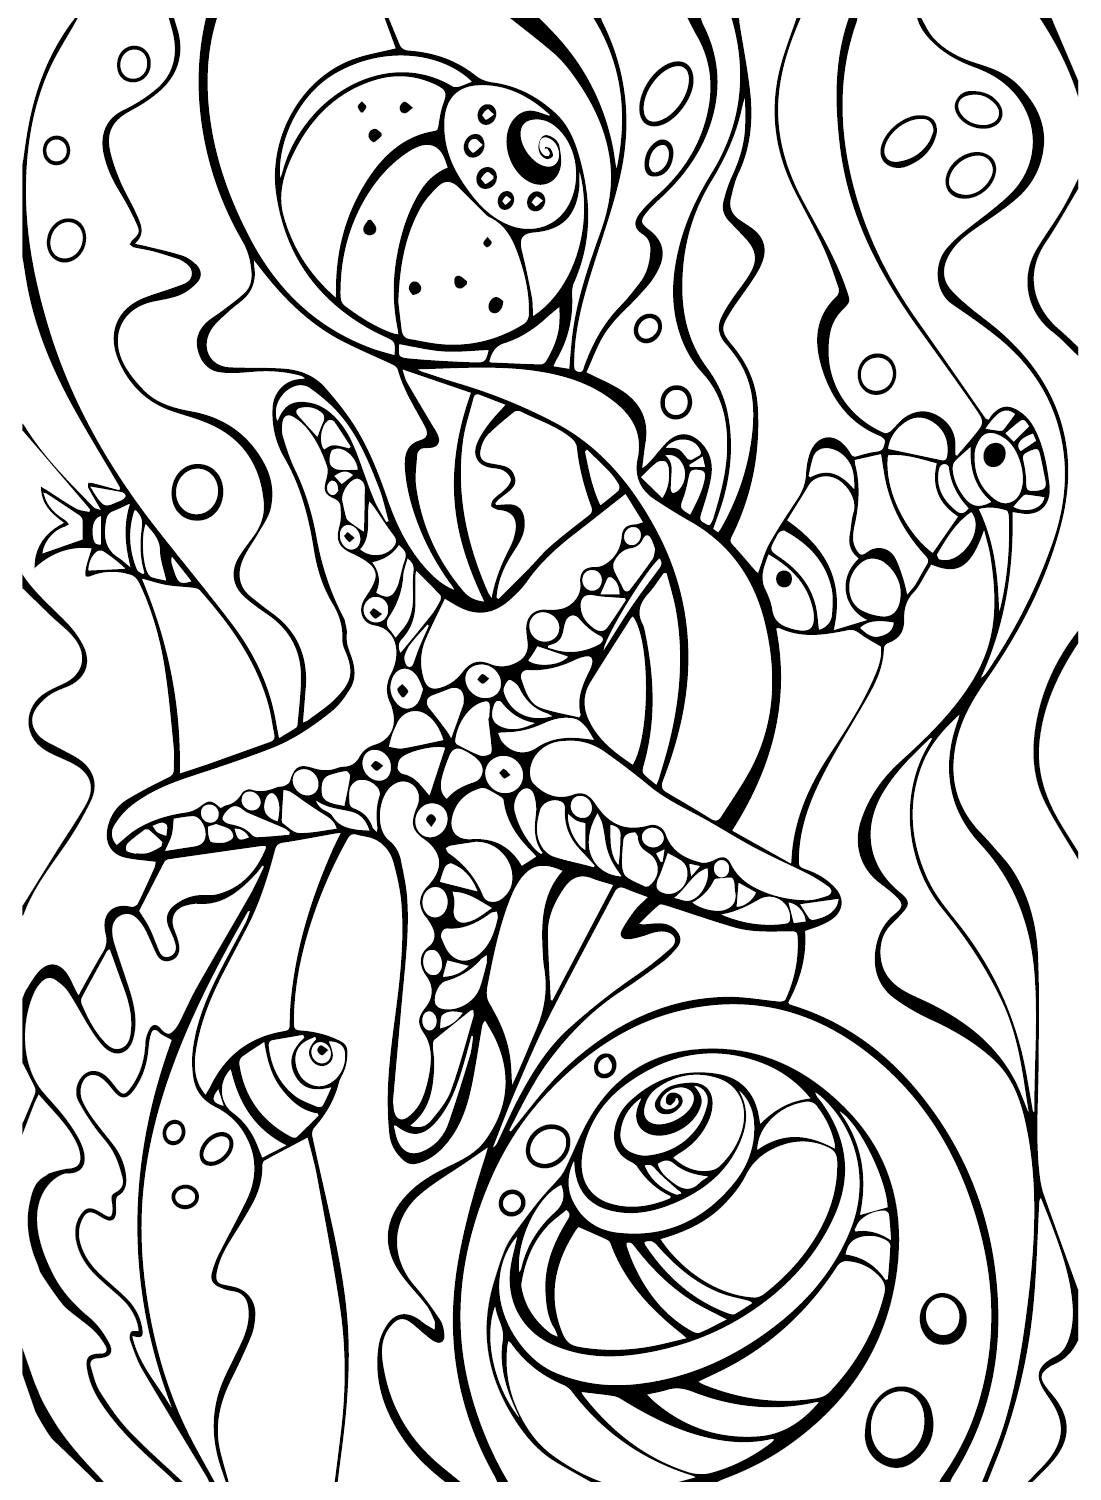 Starfish color Sheets Coloring Page - Free Printable Coloring Pages